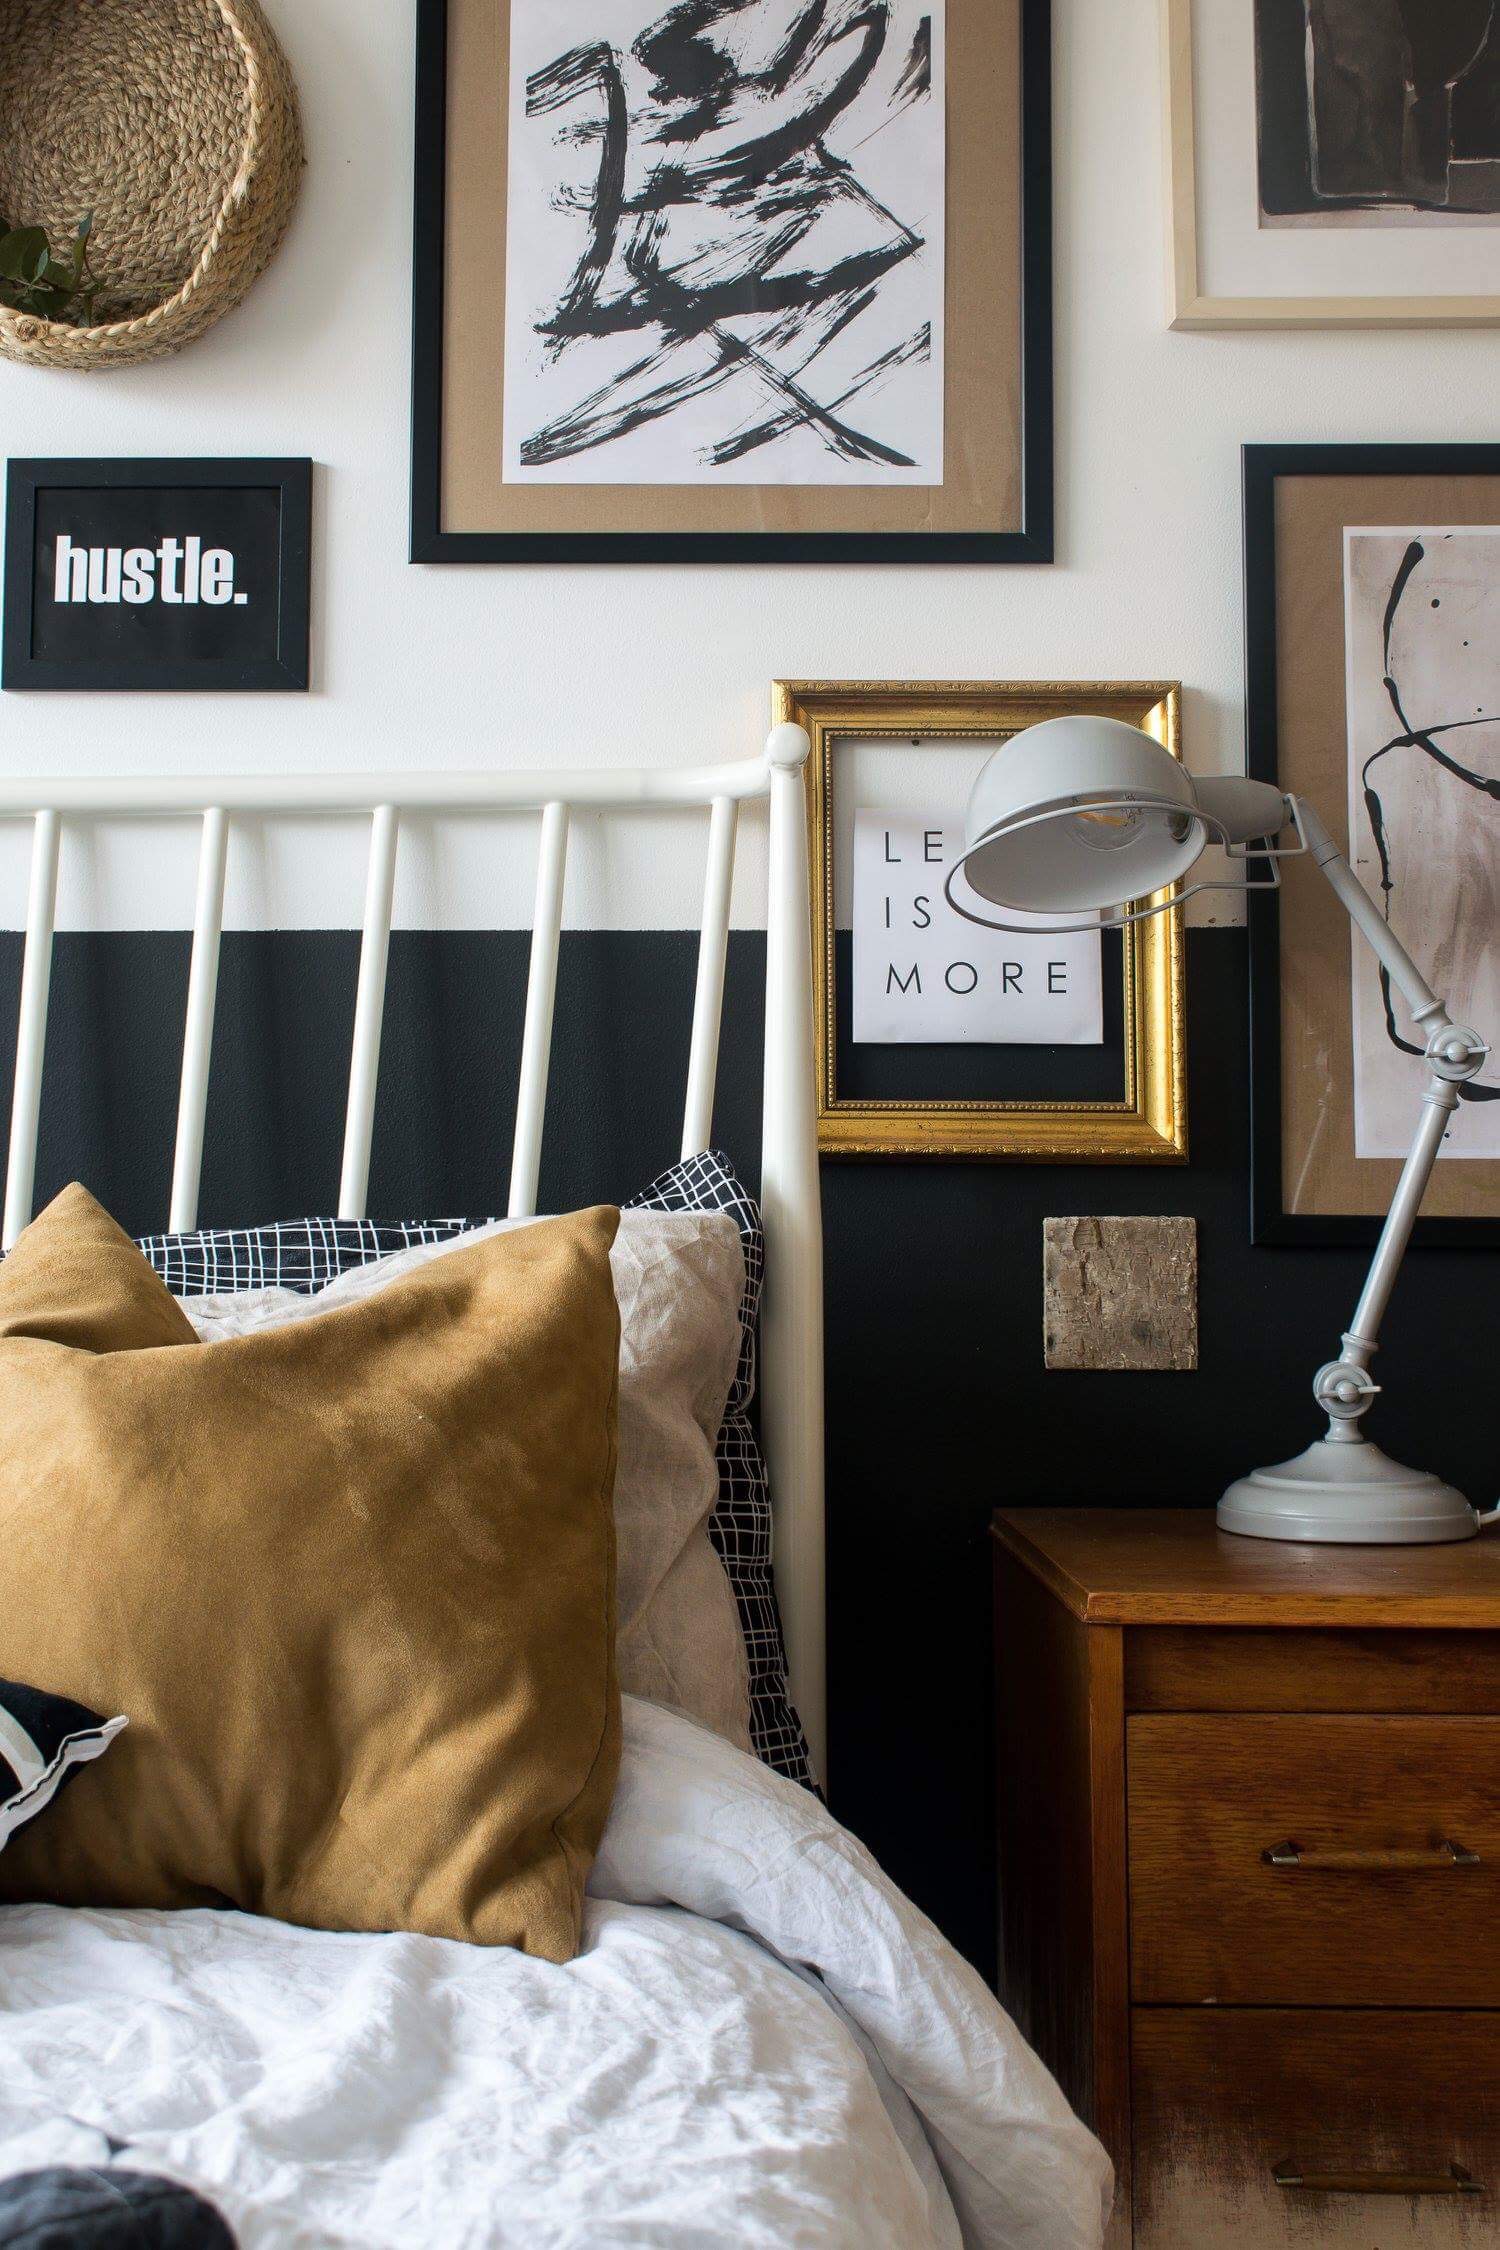 Big Style in a Small Space Rental- Organizing Tips